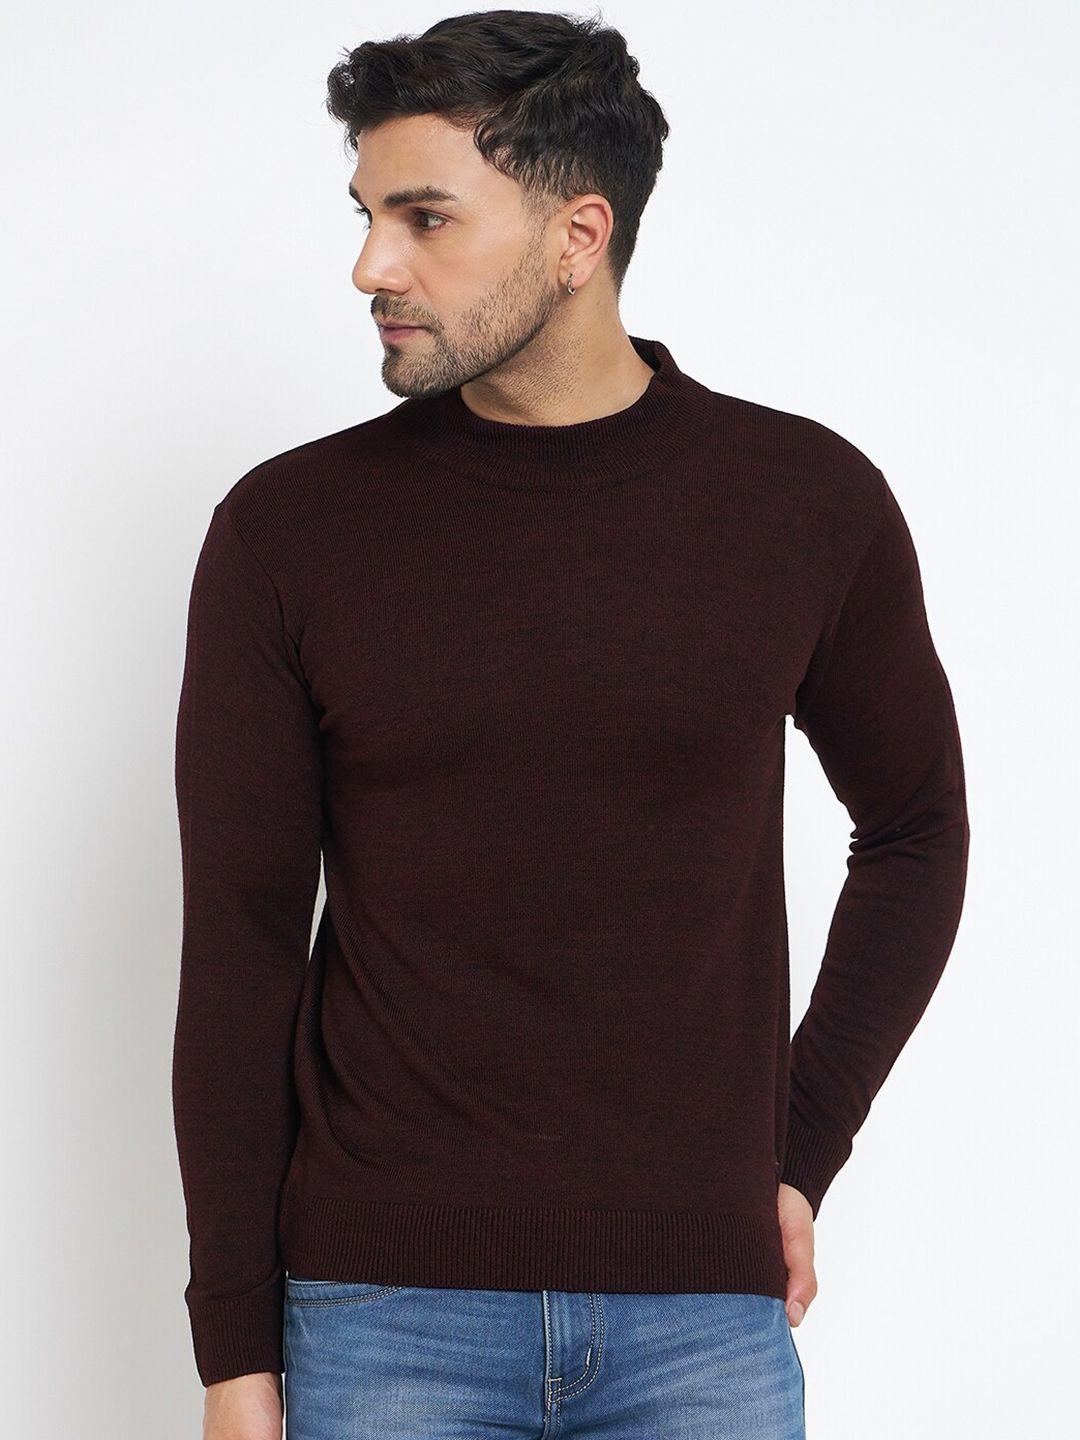 duke turtle neck long sleeves acrylic pullover sweater